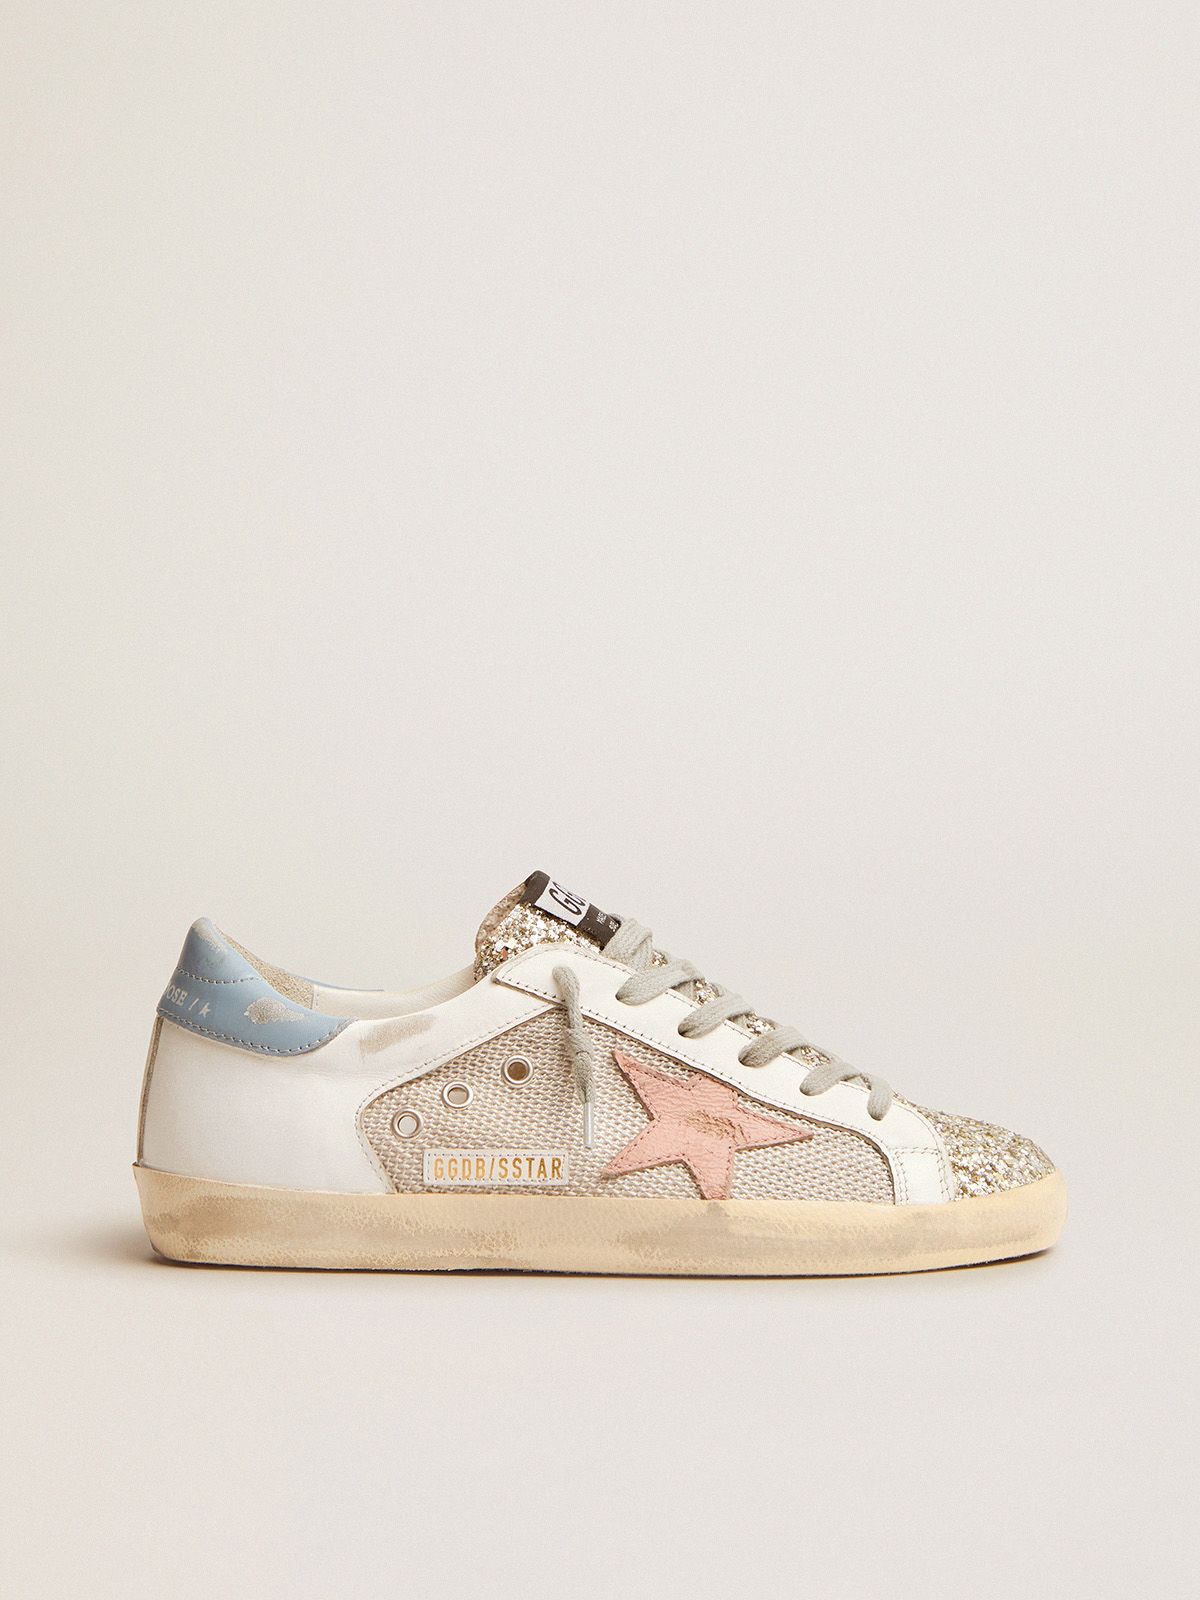 Super-Star LTD sneakers in white leather with mesh insert and silver glitter tongue | 